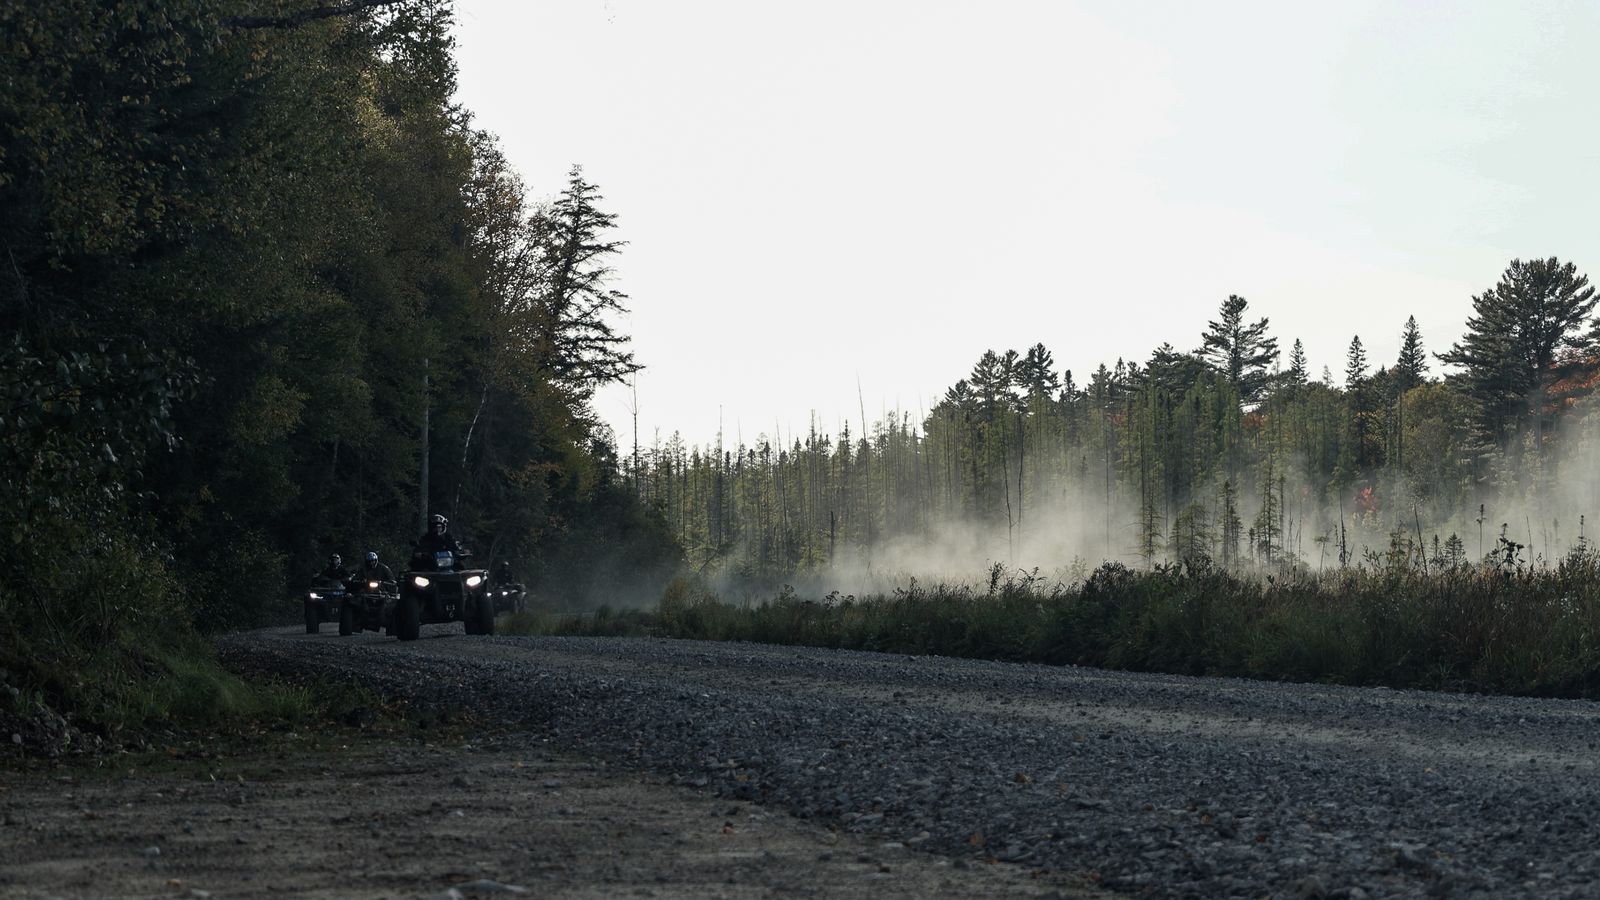 a line of riders on ATVs coming up a stretch of straight gravel road surrounded by thick, dark forest. They are raising a trail of dust that appears like mist behind them. 